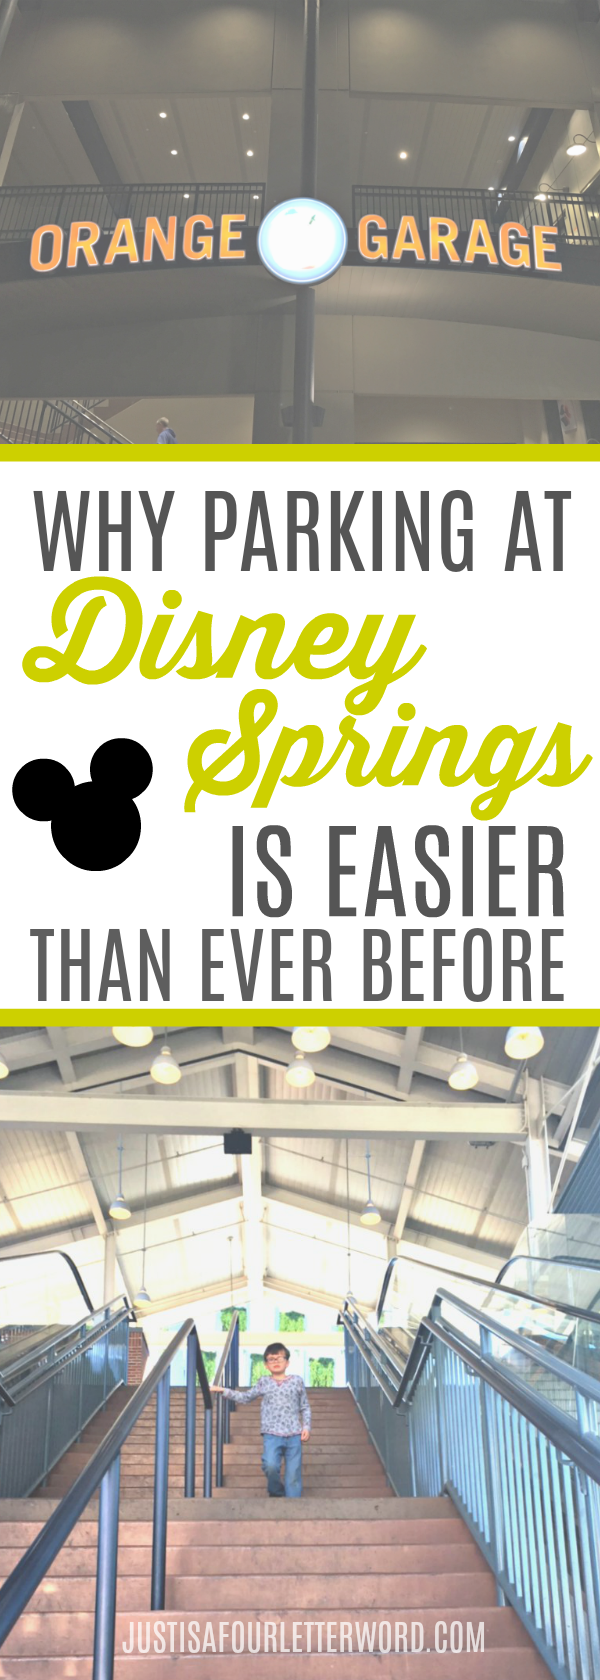 Why Parking at Disney Springs is easier than ever before